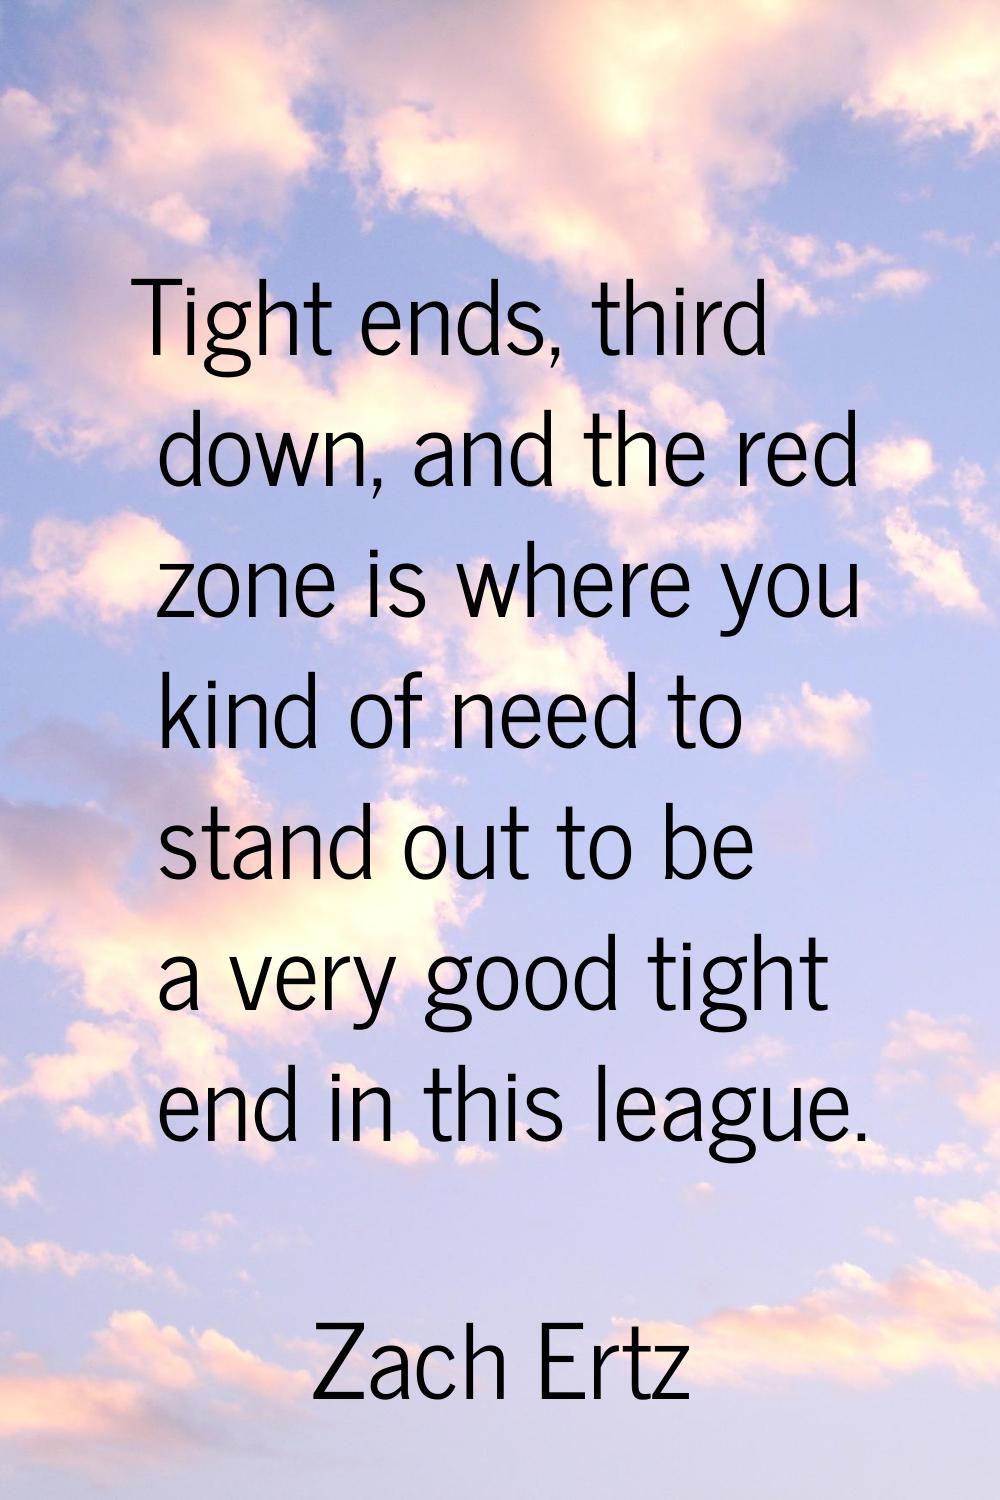 Tight ends, third down, and the red zone is where you kind of need to stand out to be a very good t